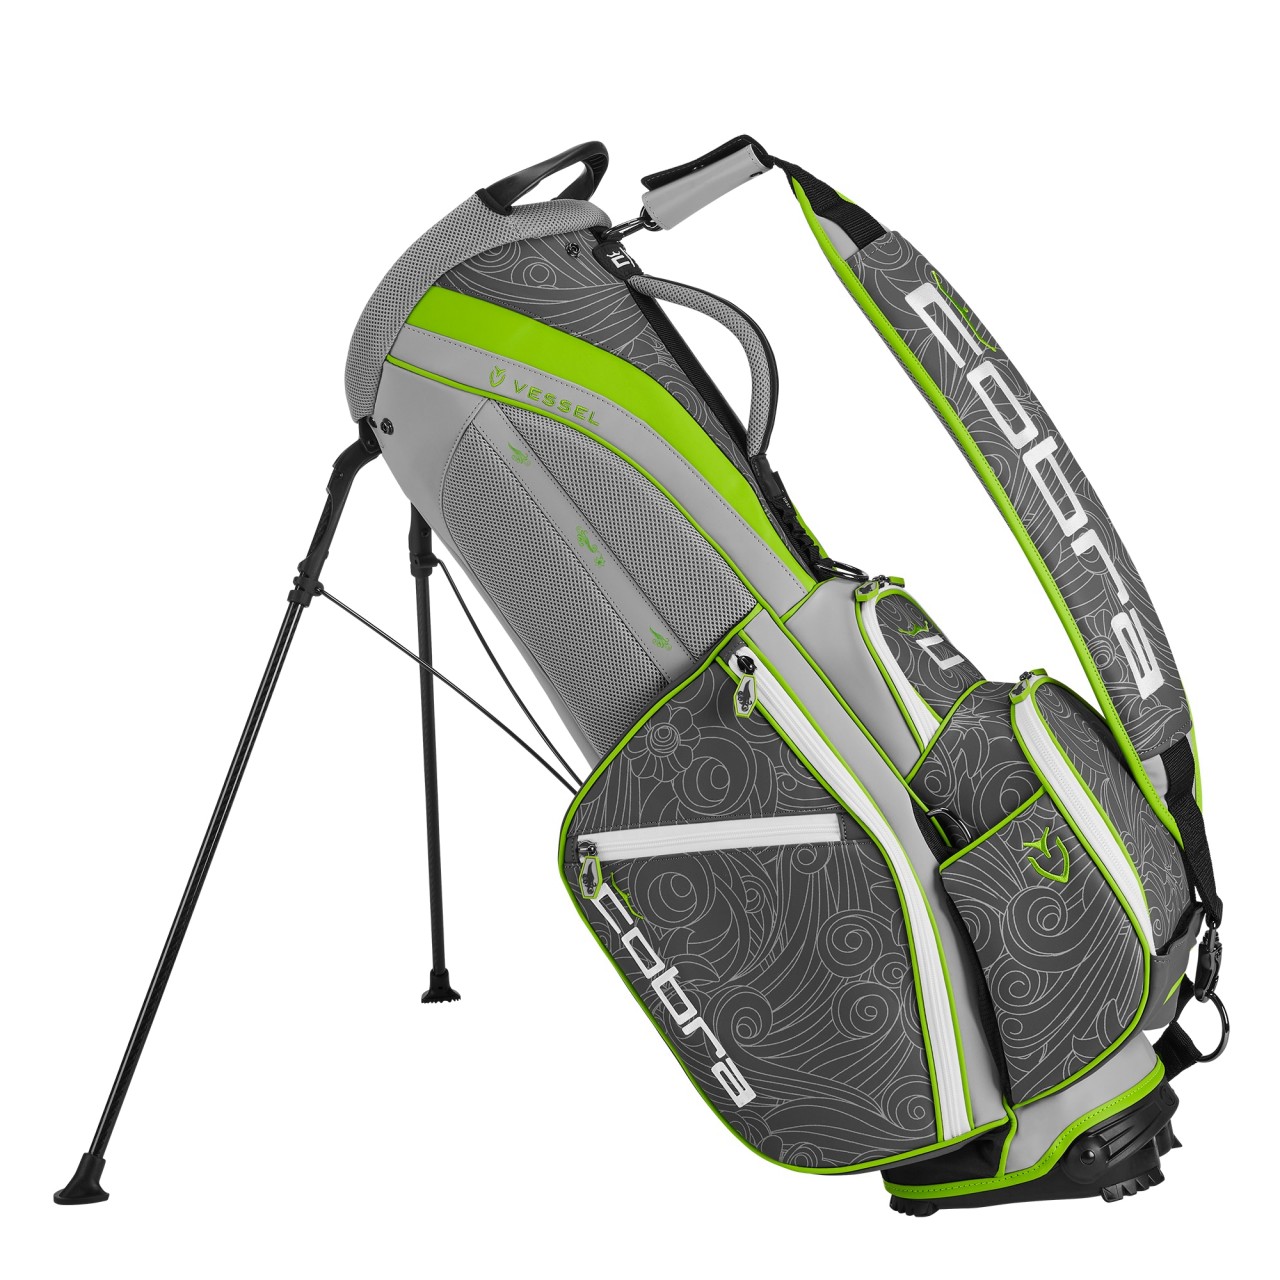 Cobra Gust O‘ Wind Tour Stand Bag Limited Edition